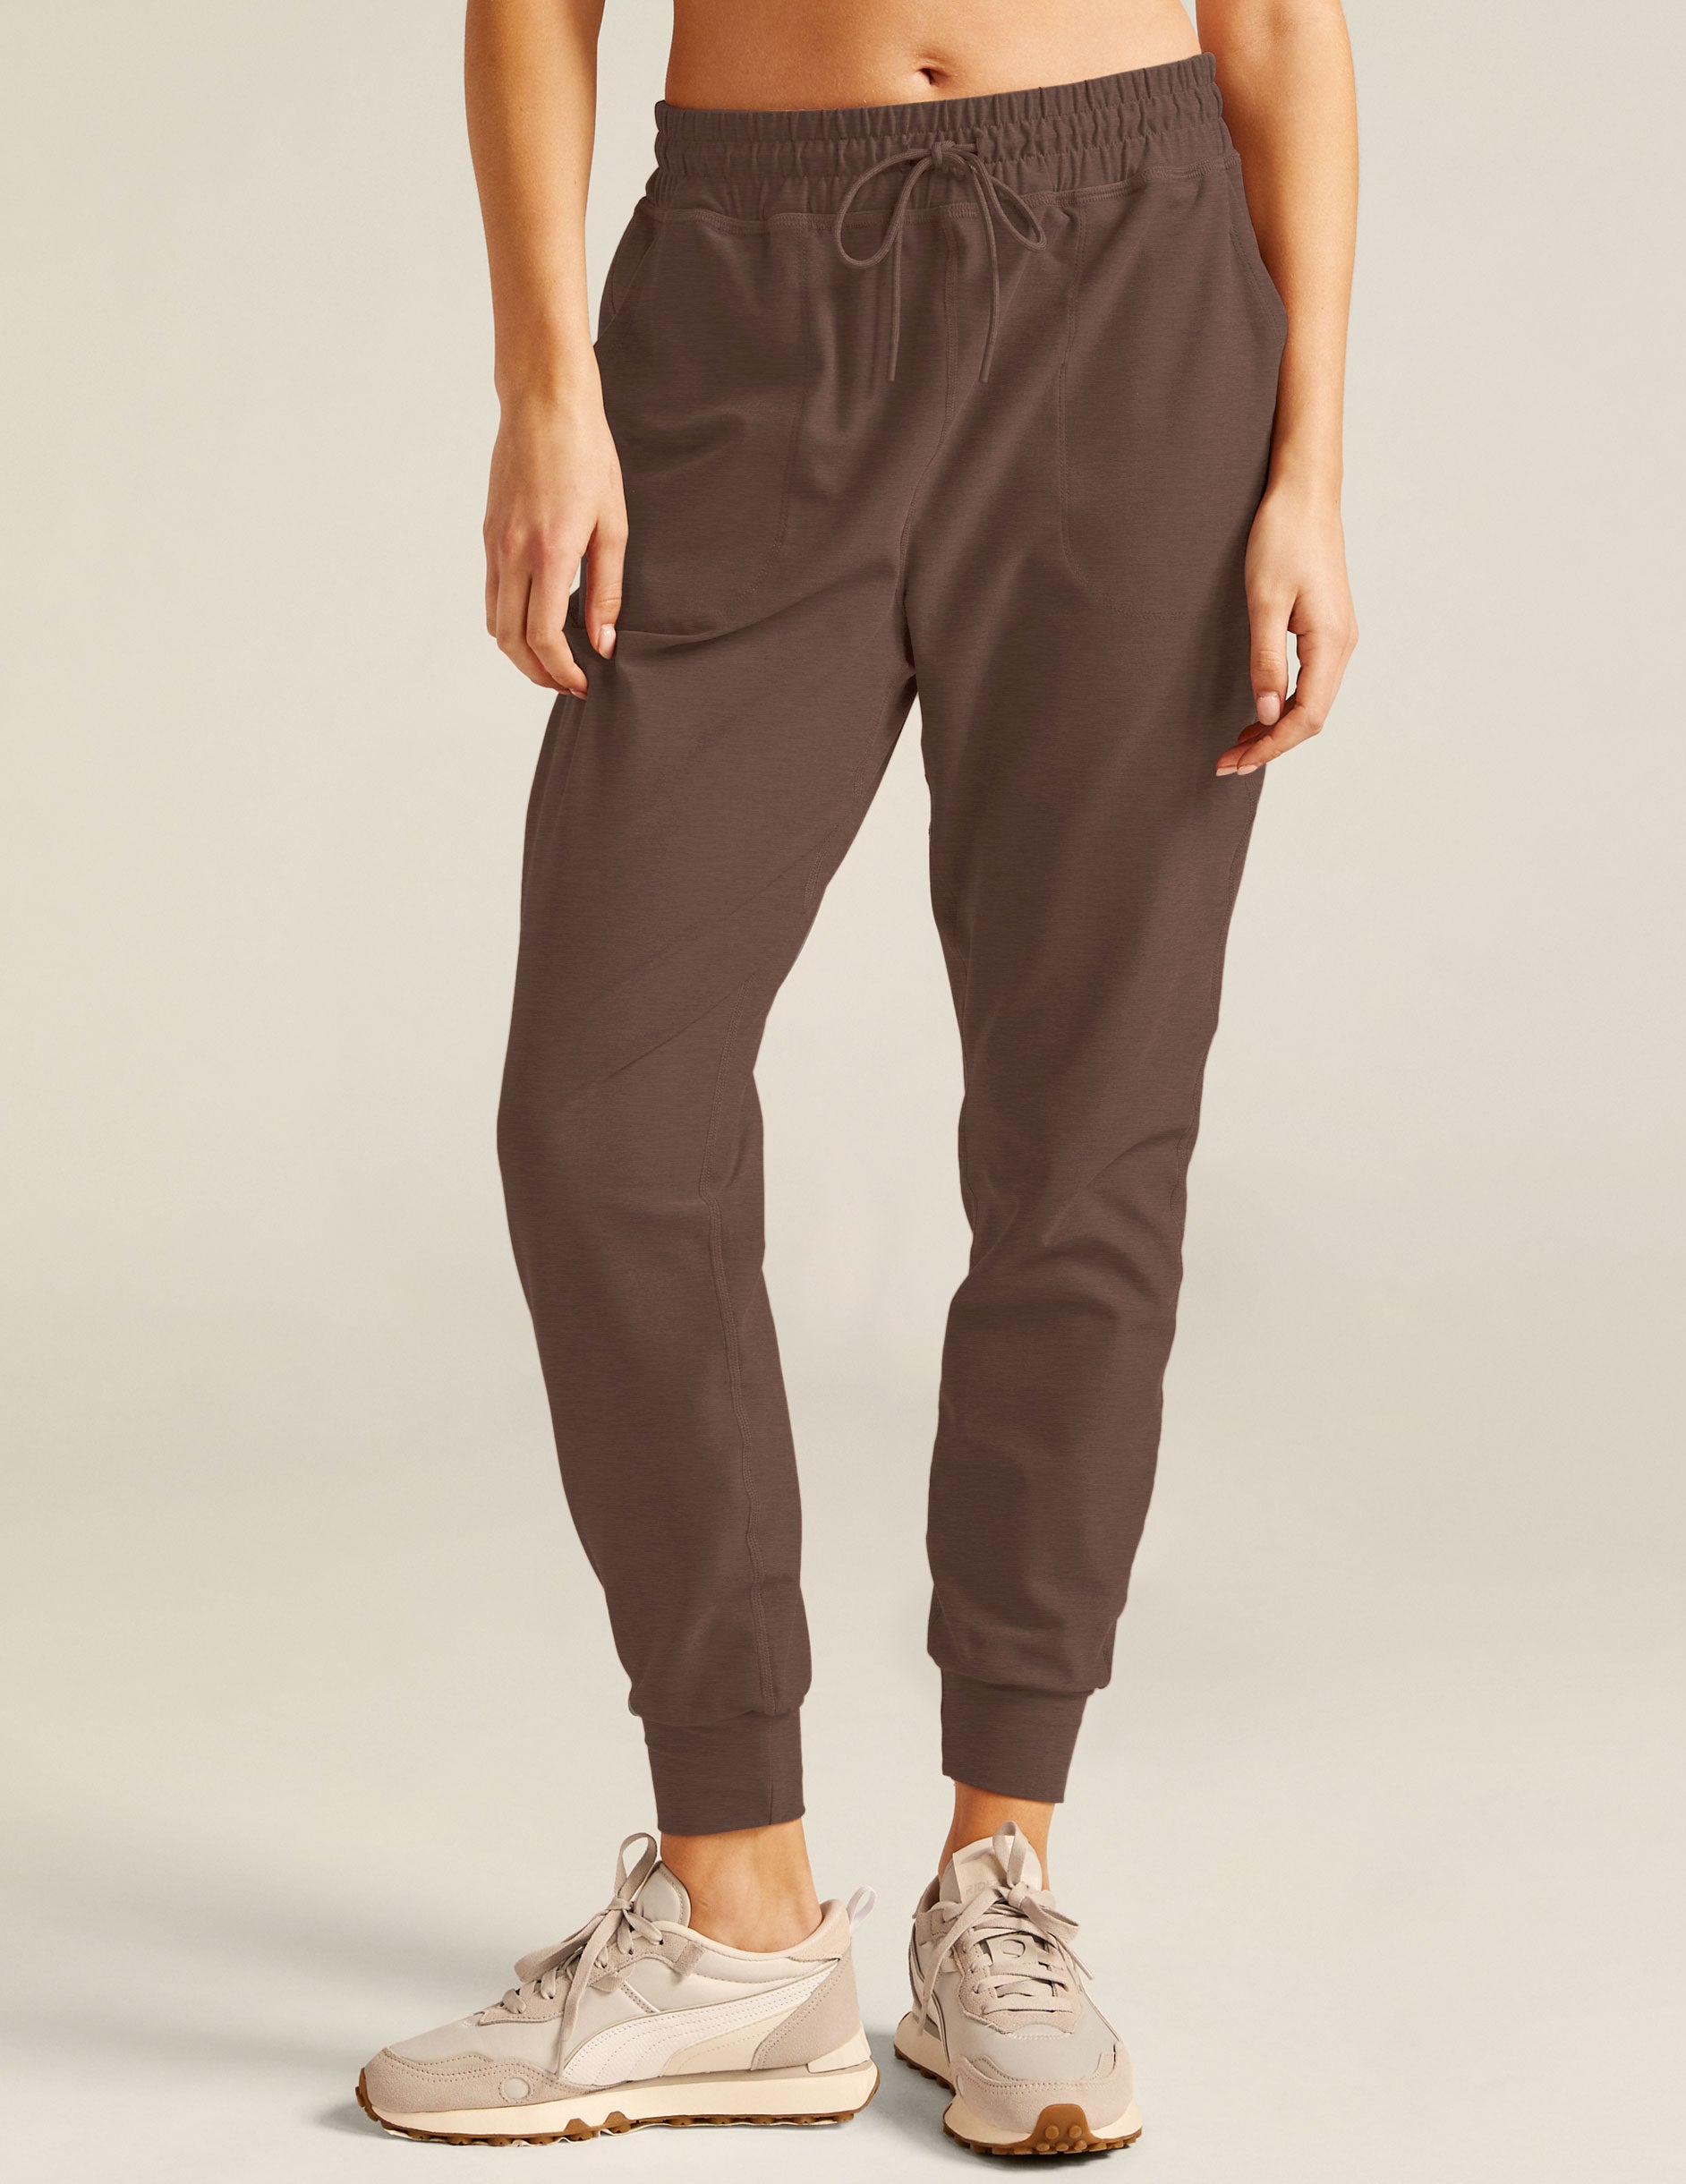 brown midi pocket joggers with an elastic waistband and drawstring. 